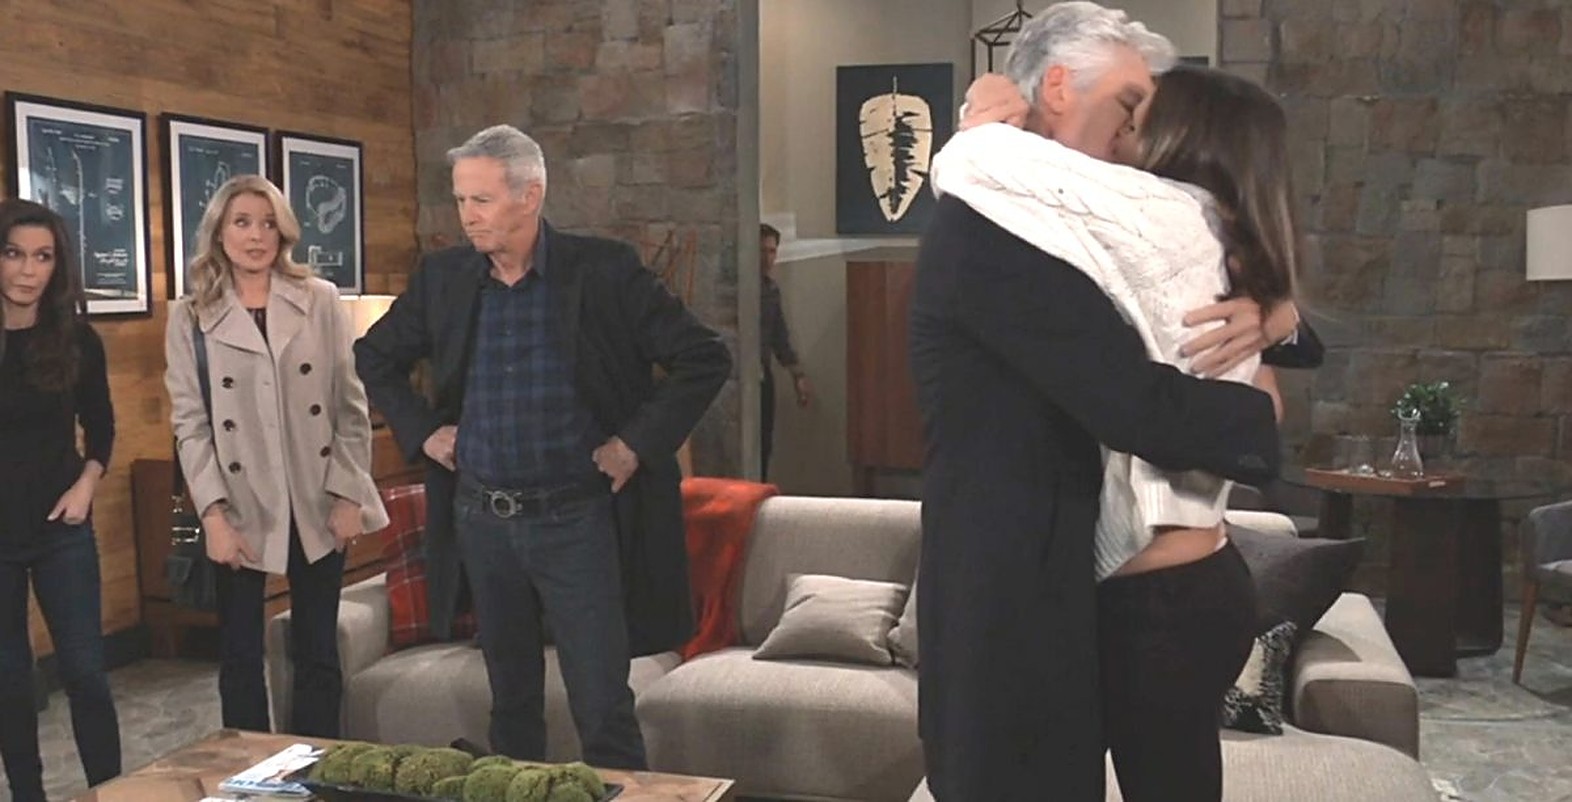 GH/Martin (Michael E. Knight) and Lucy (Lynn Hering) reunite after months